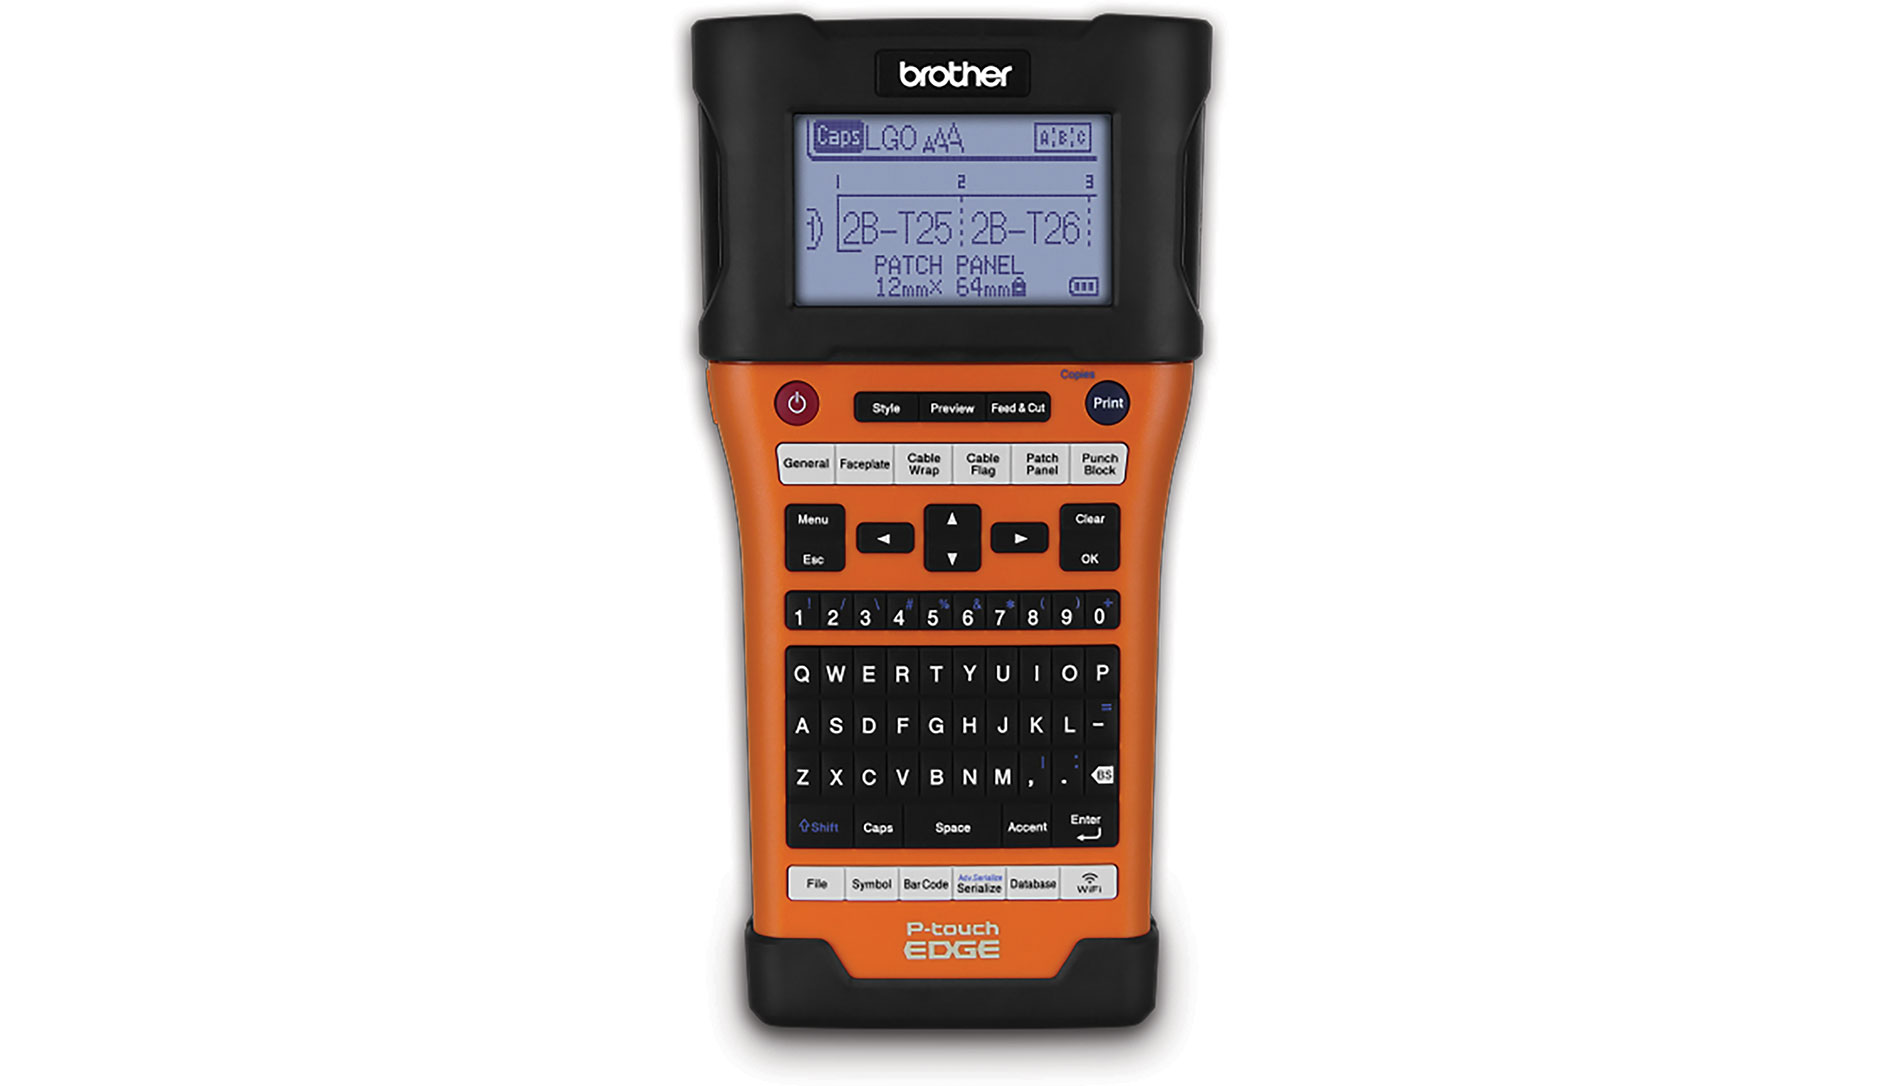 Brother PTE550W P-touch Edge label printer. Image by www.brothermobilesolutions.com.